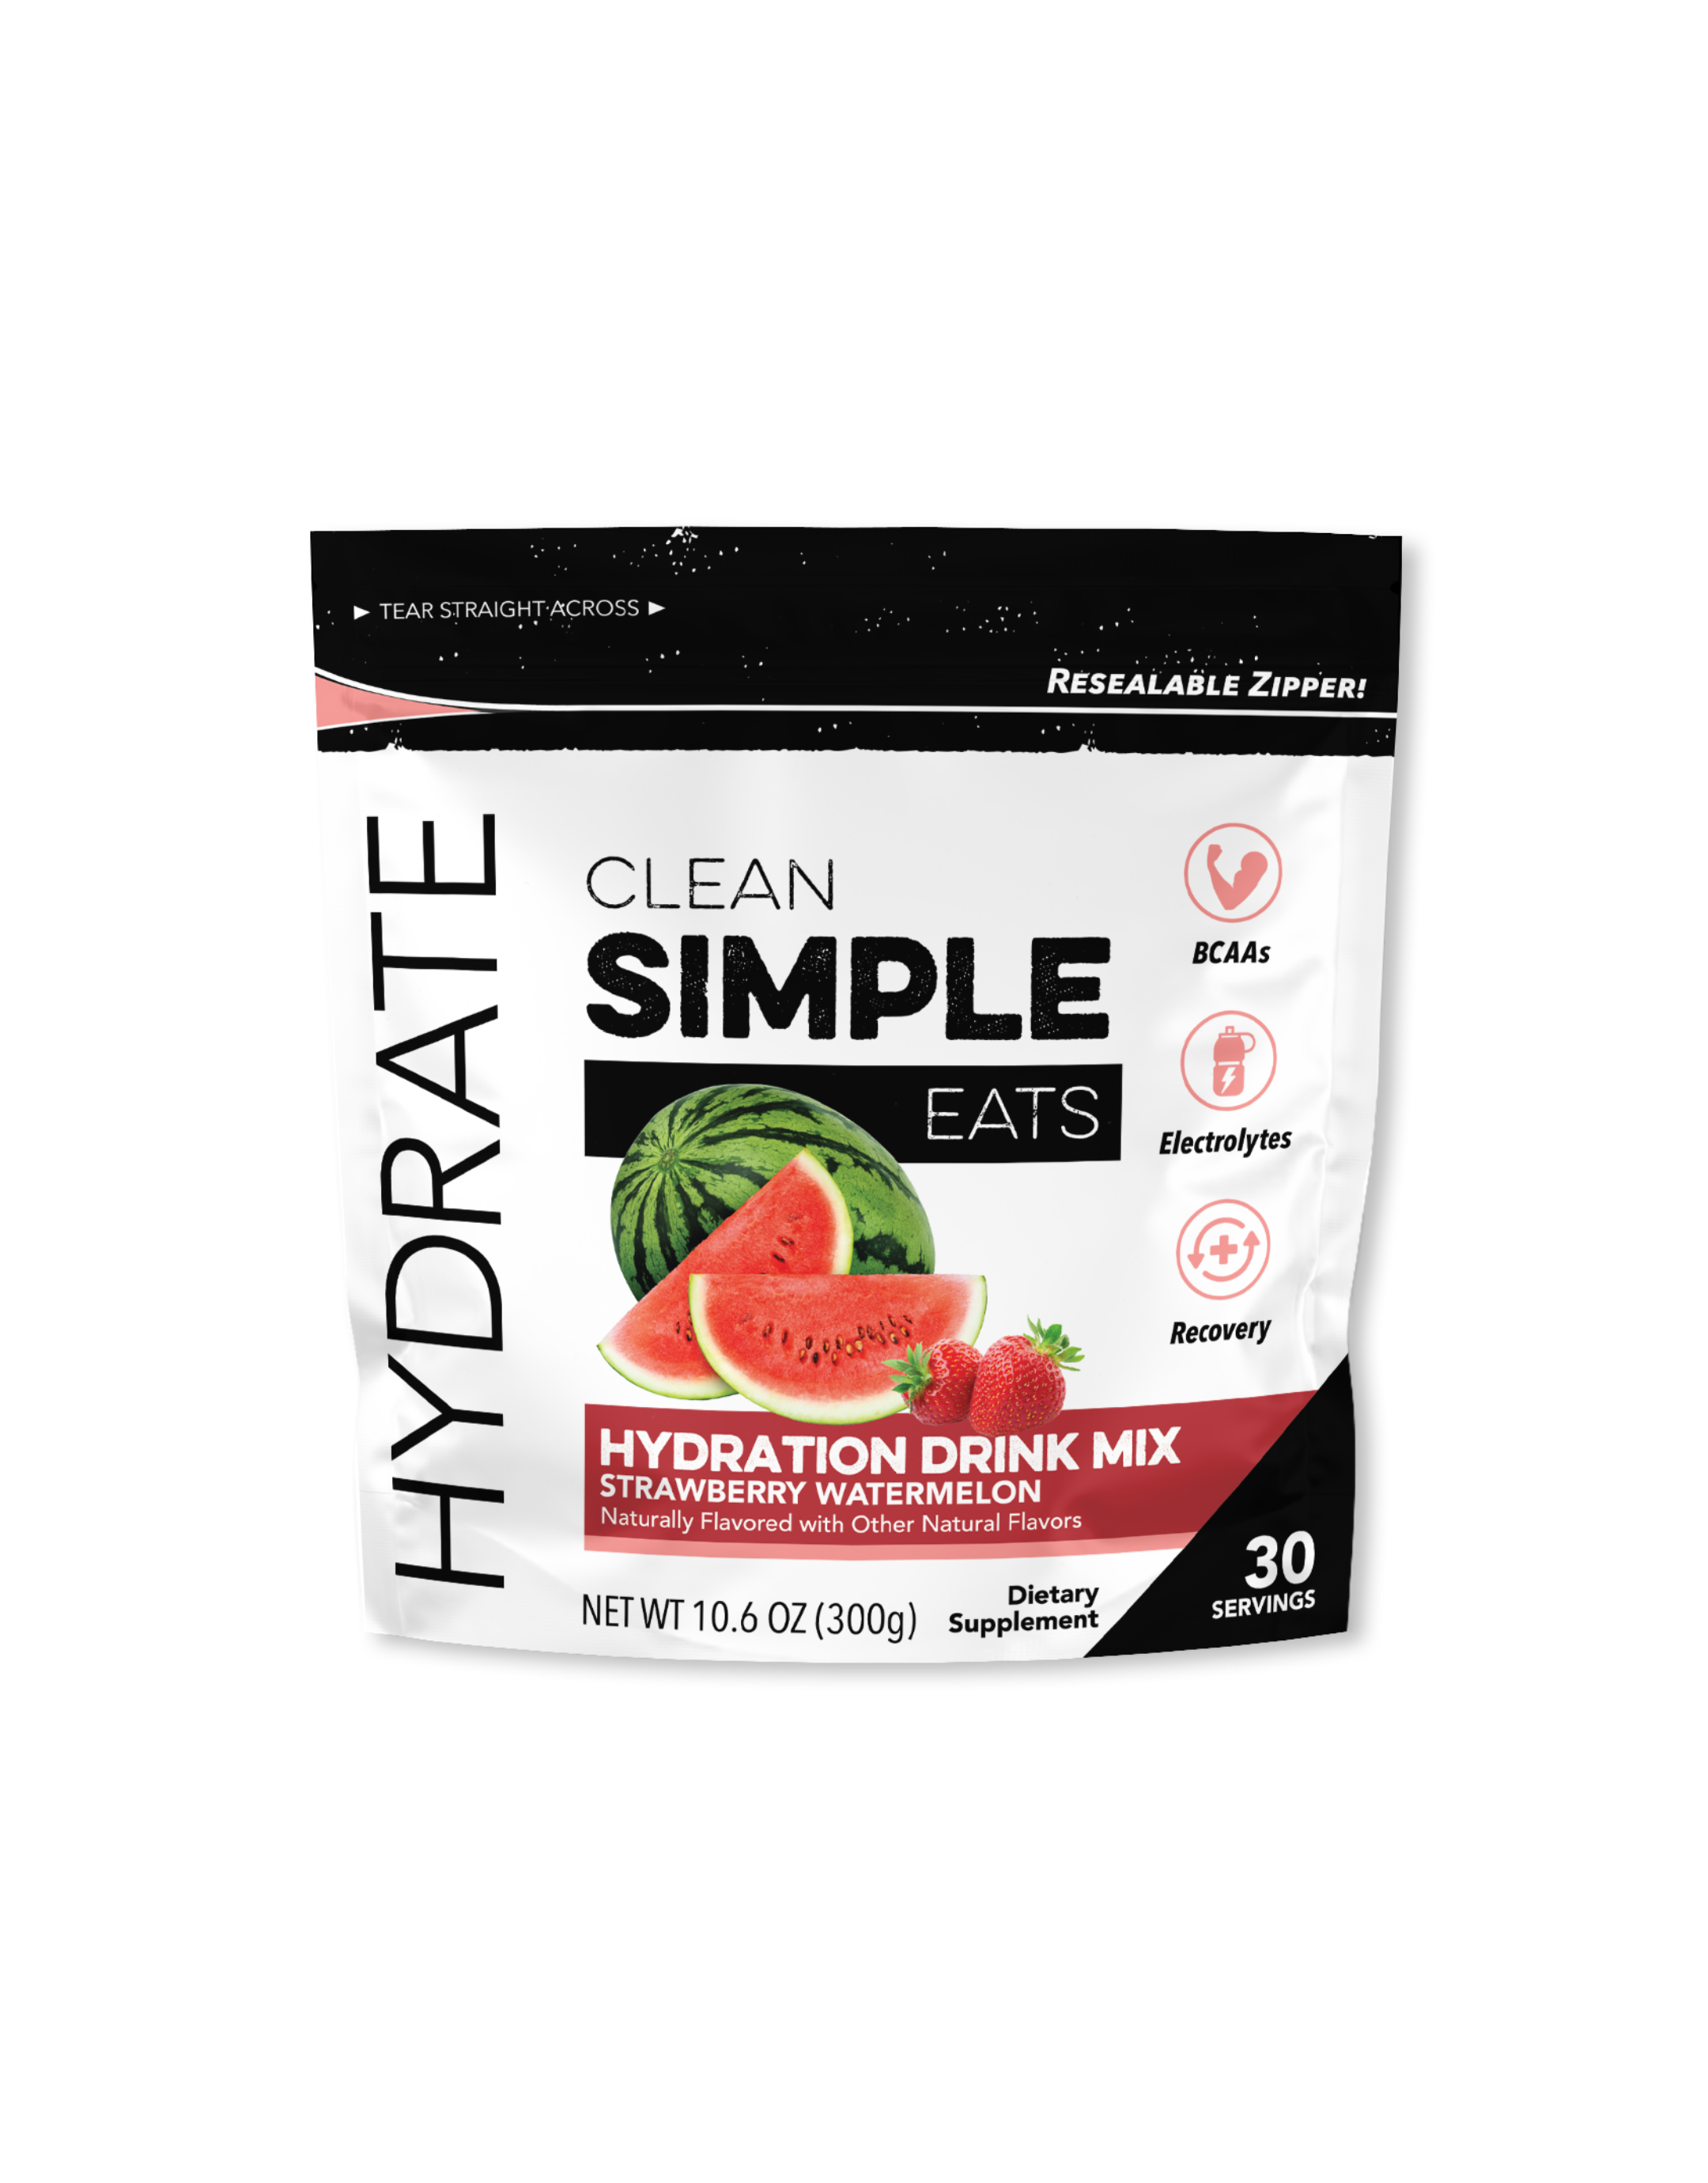 Hydrate: Strawberry Watermelon Hydration Drink Mix (30 Serving Bag)